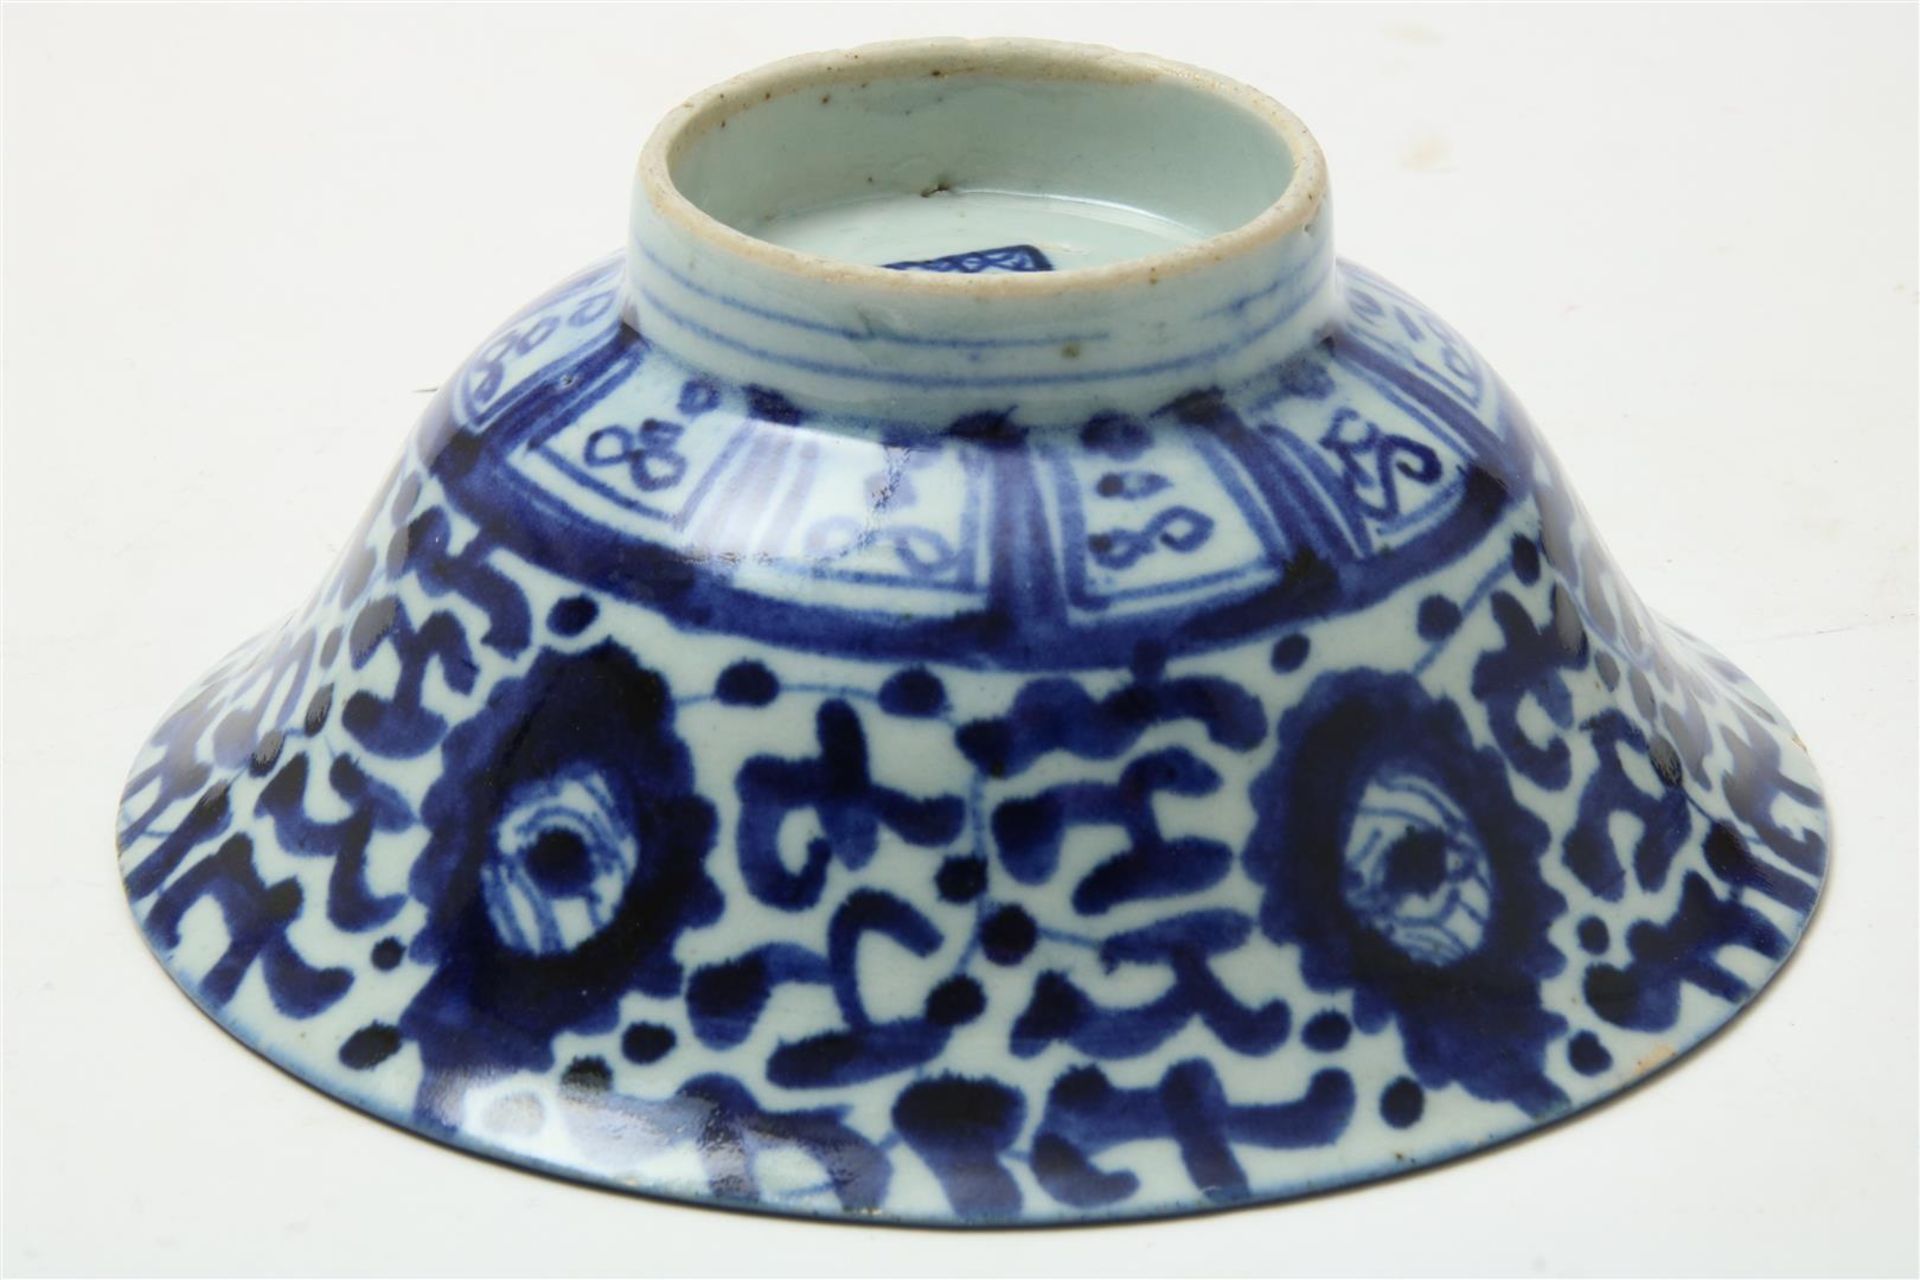 Porcelain bowl blue decorated with flowers, China 18th/19th century, marked with shopkeeper's - Image 4 of 5